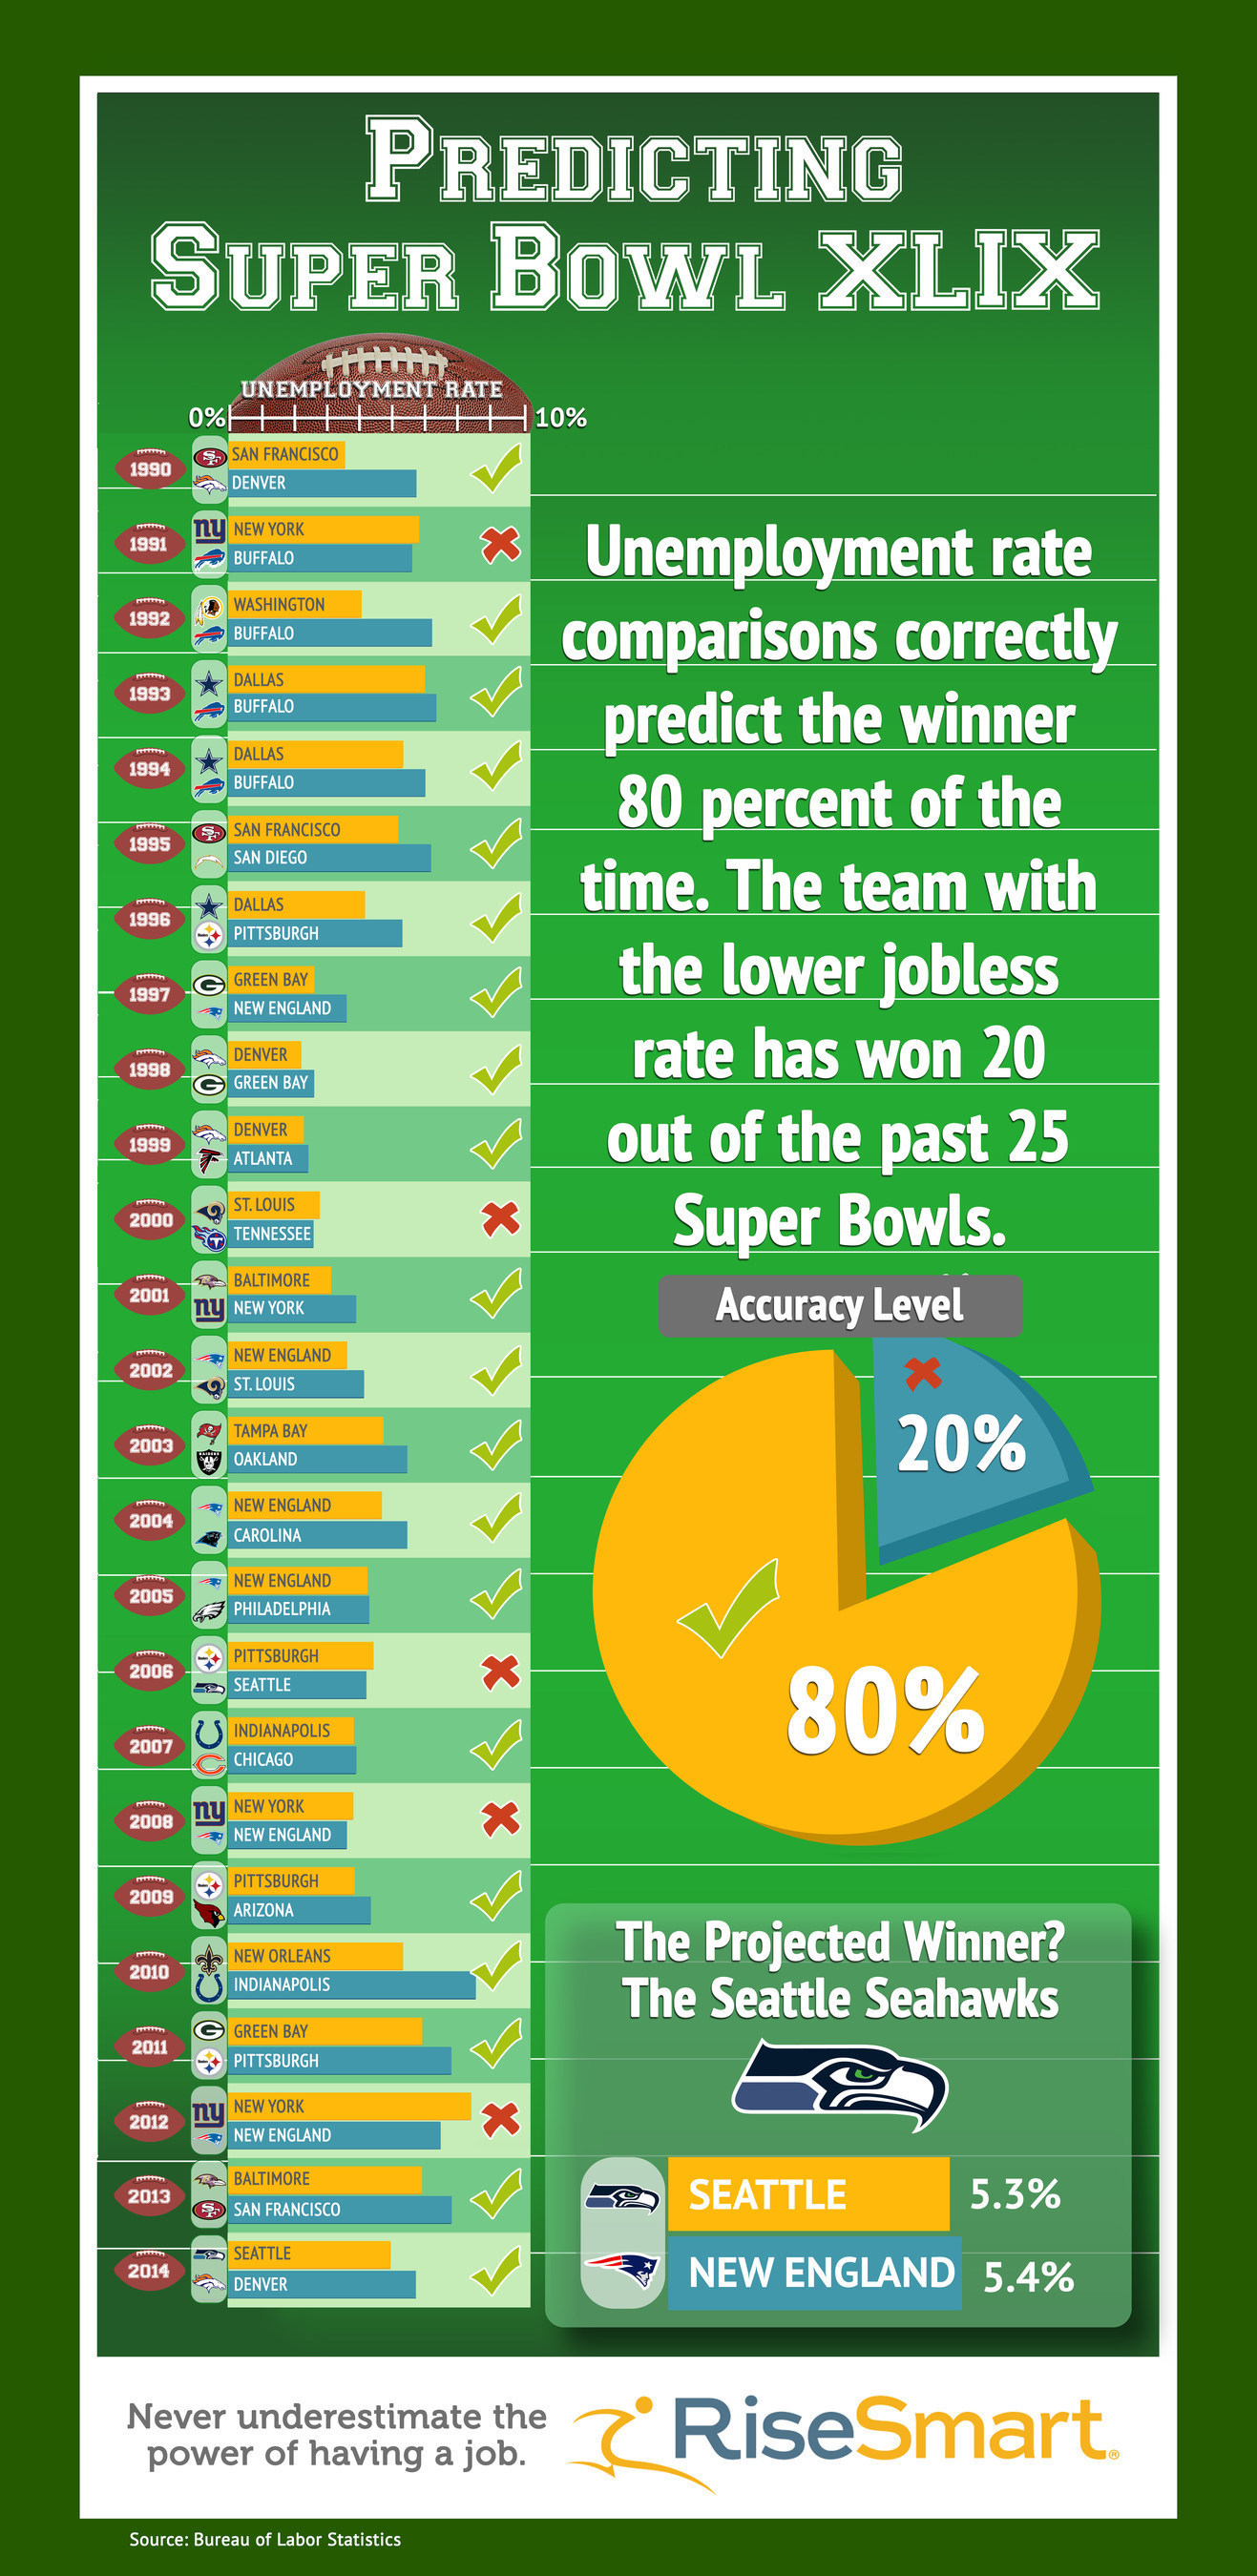 Seahawks Will Win Super Bowl XLIX for Back-to-Back Titles Based on RiseSmart's Predictor of Big-Game Success